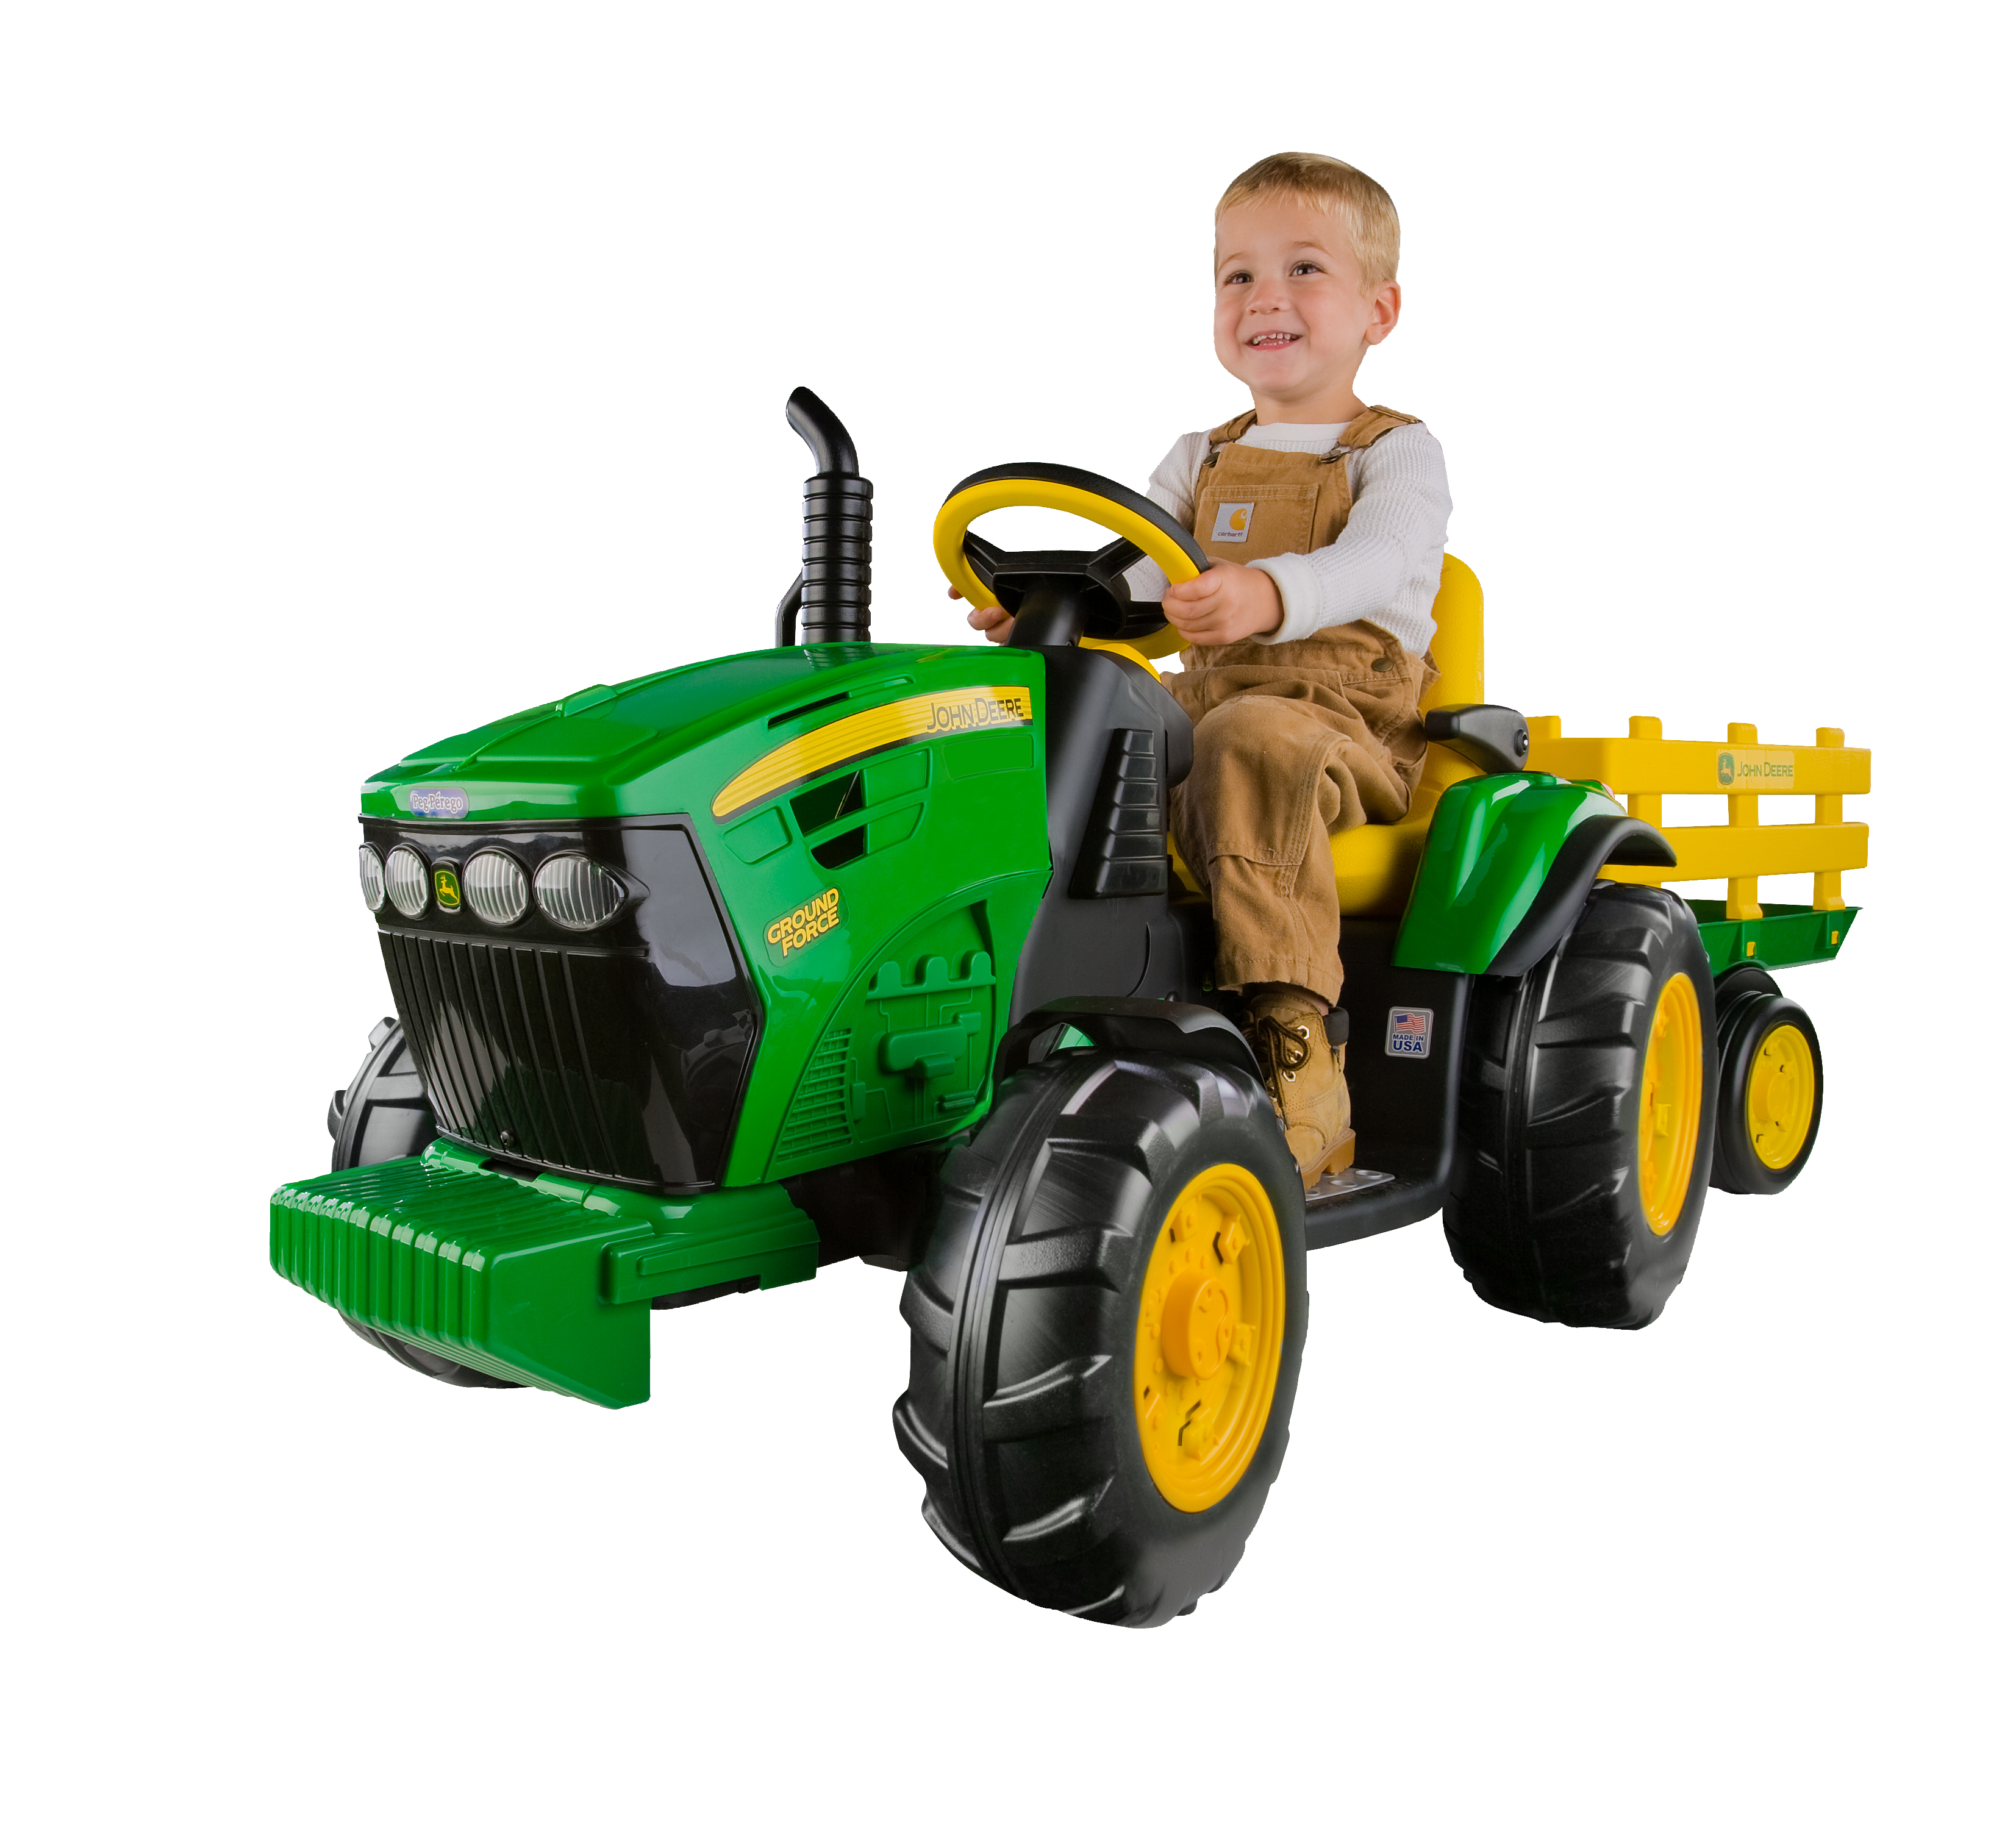 12V Peg Perego John Deere Ground Force Tractor Ride-on, for a Child Ages 3-7 - image 1 of 6